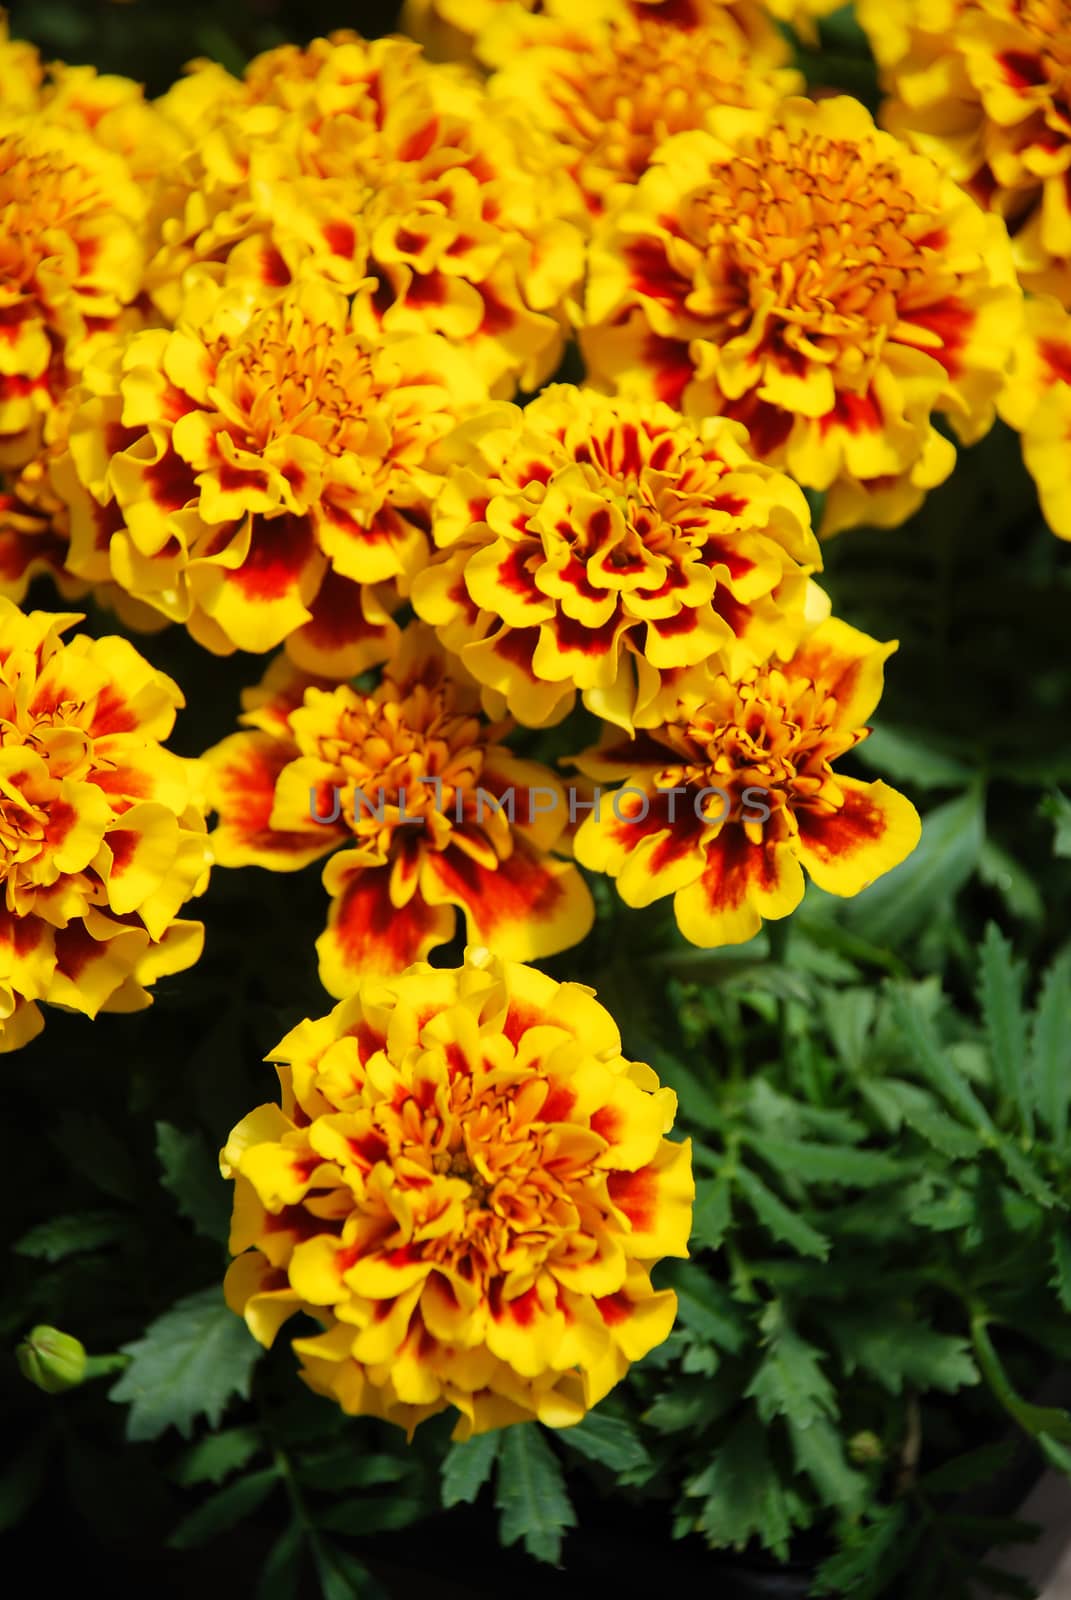 Tagetes patula french marigold in bloom, orange yellow flowers,  by yuiyuize